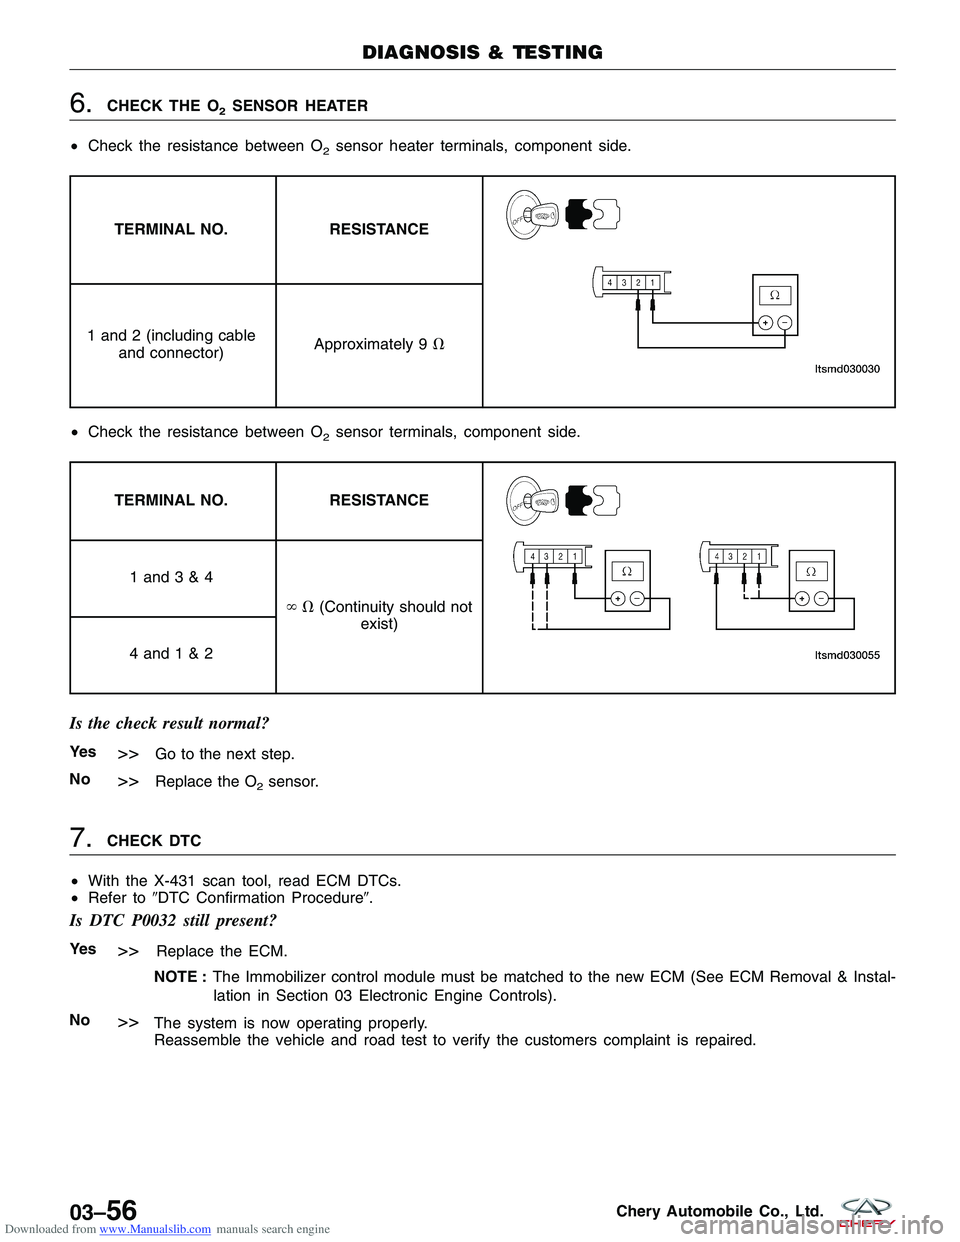 CHERY TIGGO 2009  Service Repair Manual Downloaded from www.Manualslib.com manuals search engine 6.CHECK THE O2SENSOR HEATER
• Check the resistance between O
2sensor heater terminals, component side.
TERMINAL NO. RESISTANCE
1 and 2 (inclu